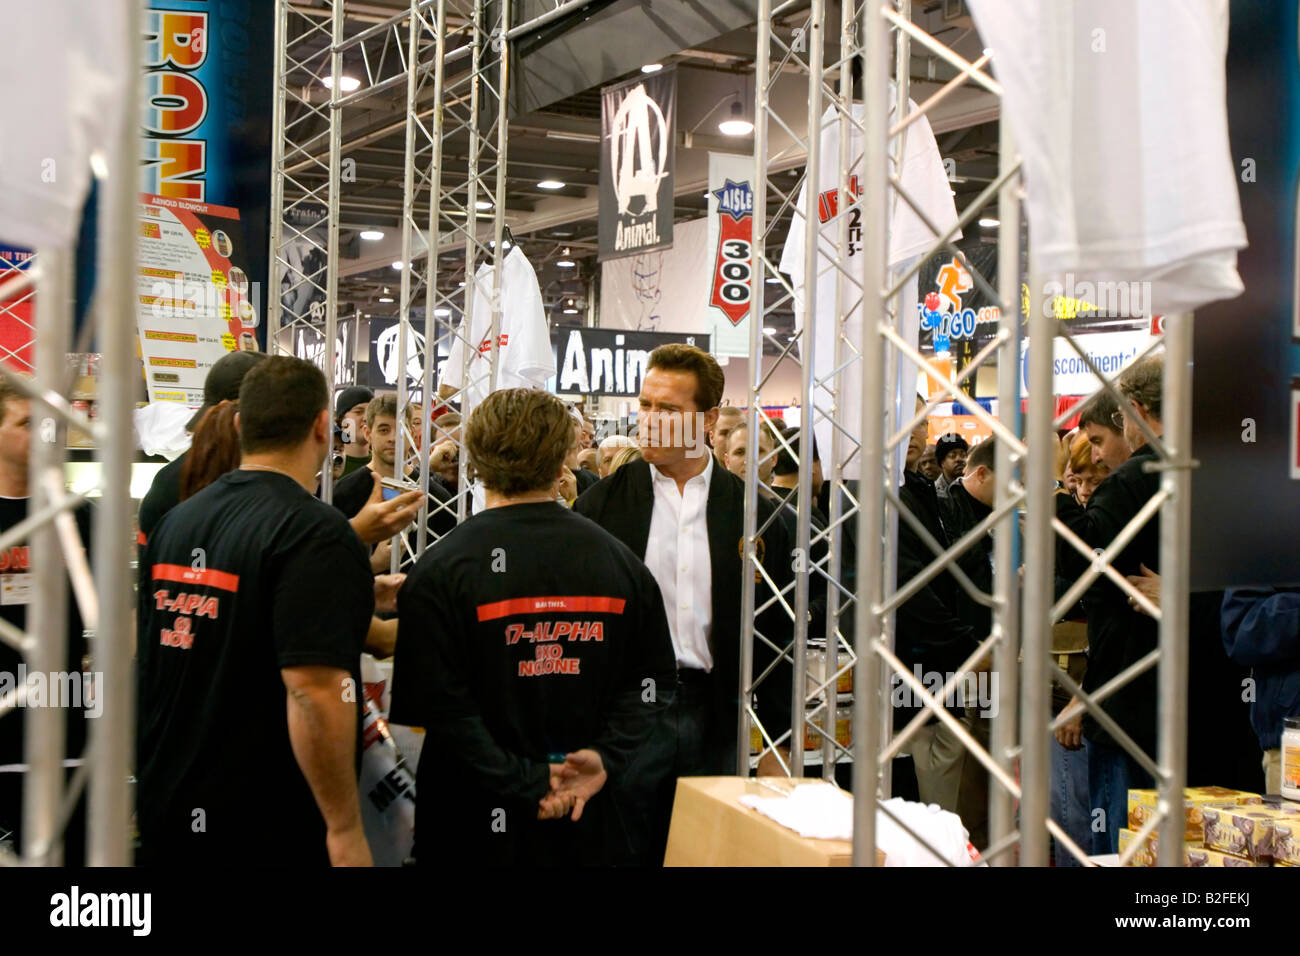 Arnold Schwarzenegger classic  at arnold classic body building show Stock Photo